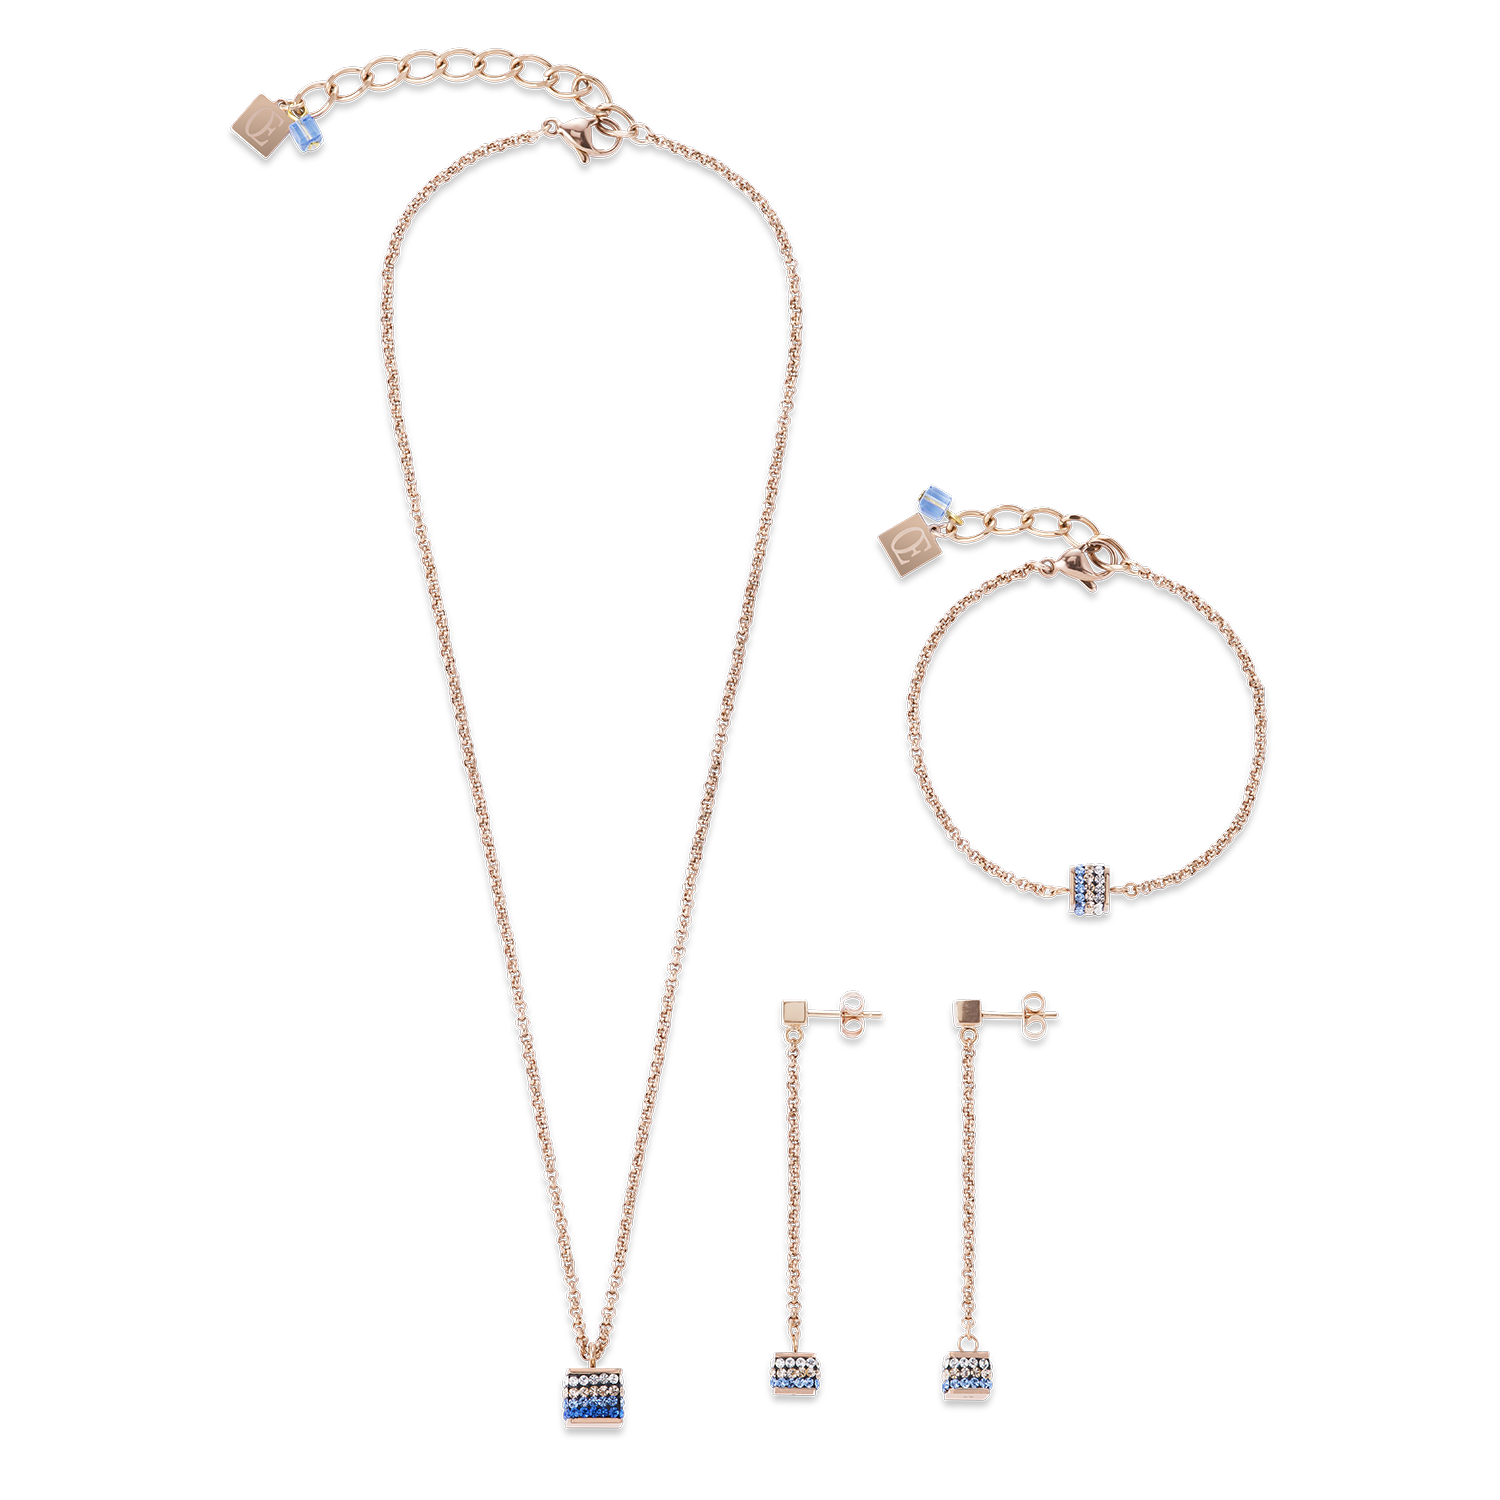 Earrings Cube Crystals pavé & stainless steel rose gold & blue